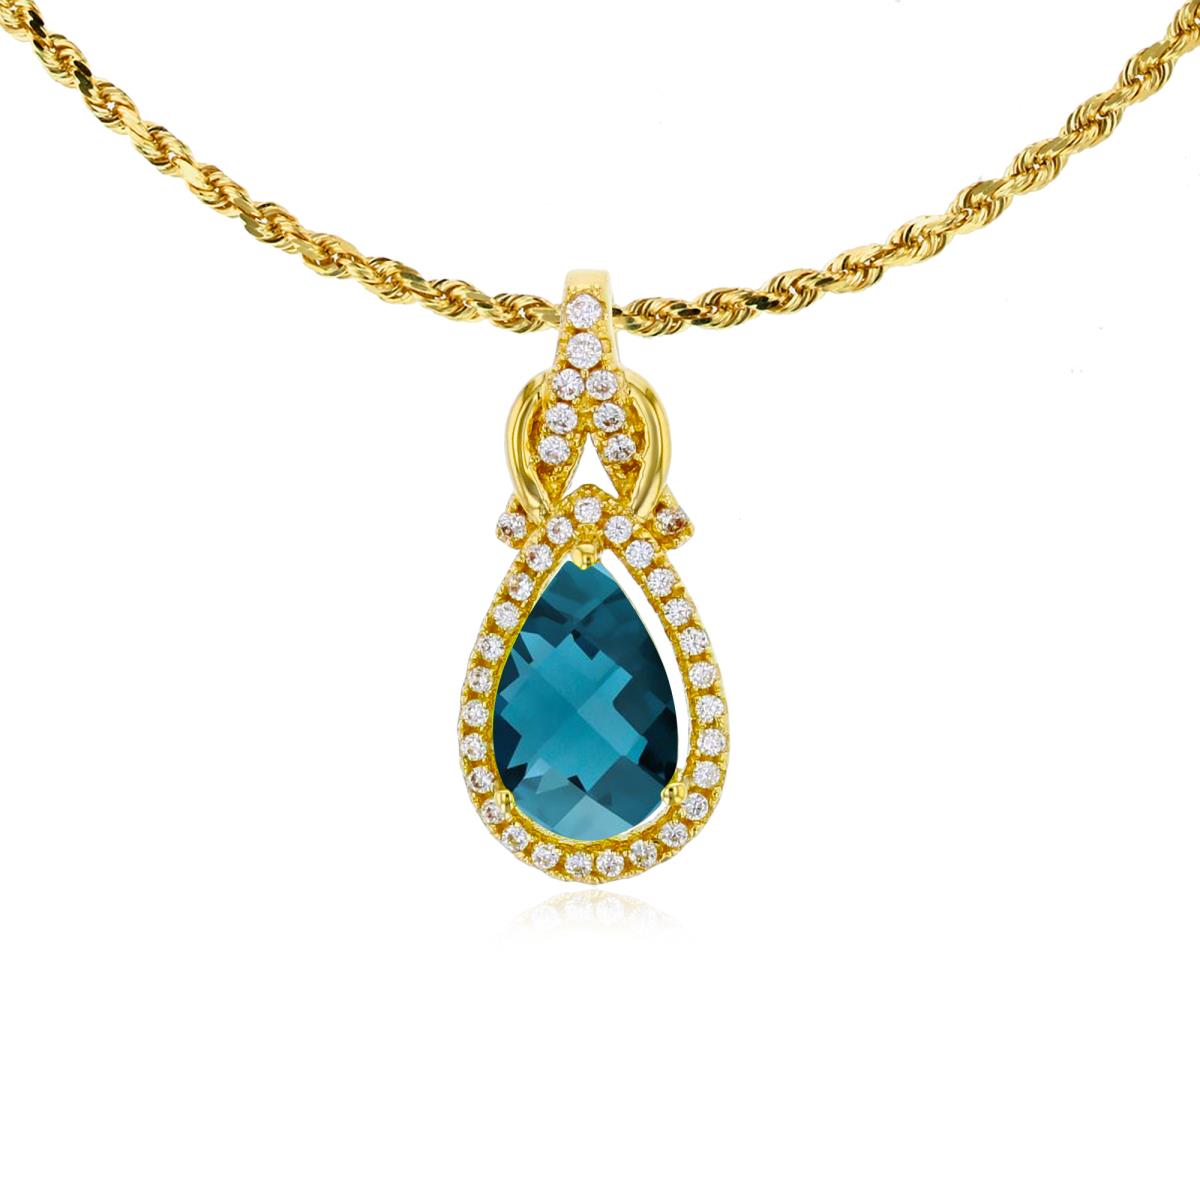 10K Yellow Gold 8x5mm Pear Cut London Blue Topaz & 0.11 CTTW Rnd Diamond Knot 18" Rope Chain Necklace